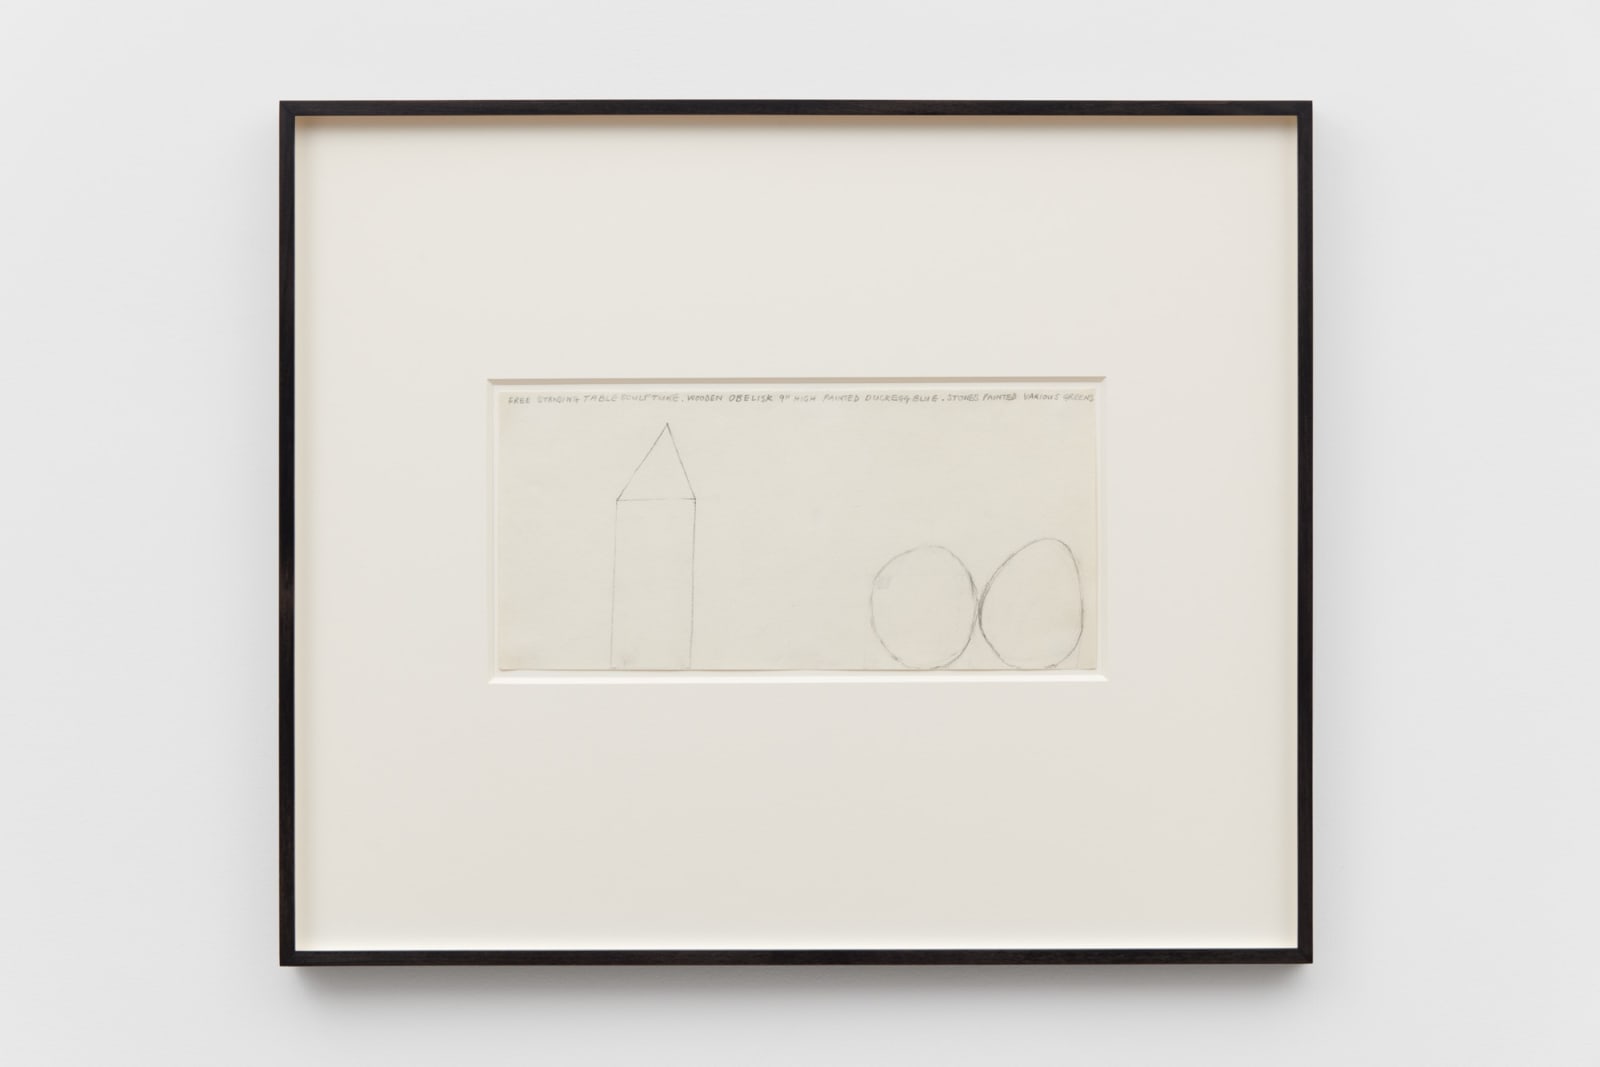 Free standing table sculpture, wooden obelisk, 1963 titled recto pencil on paper 16.5 x 35.5 cm. 6 1/2 x 13 49/50 in.